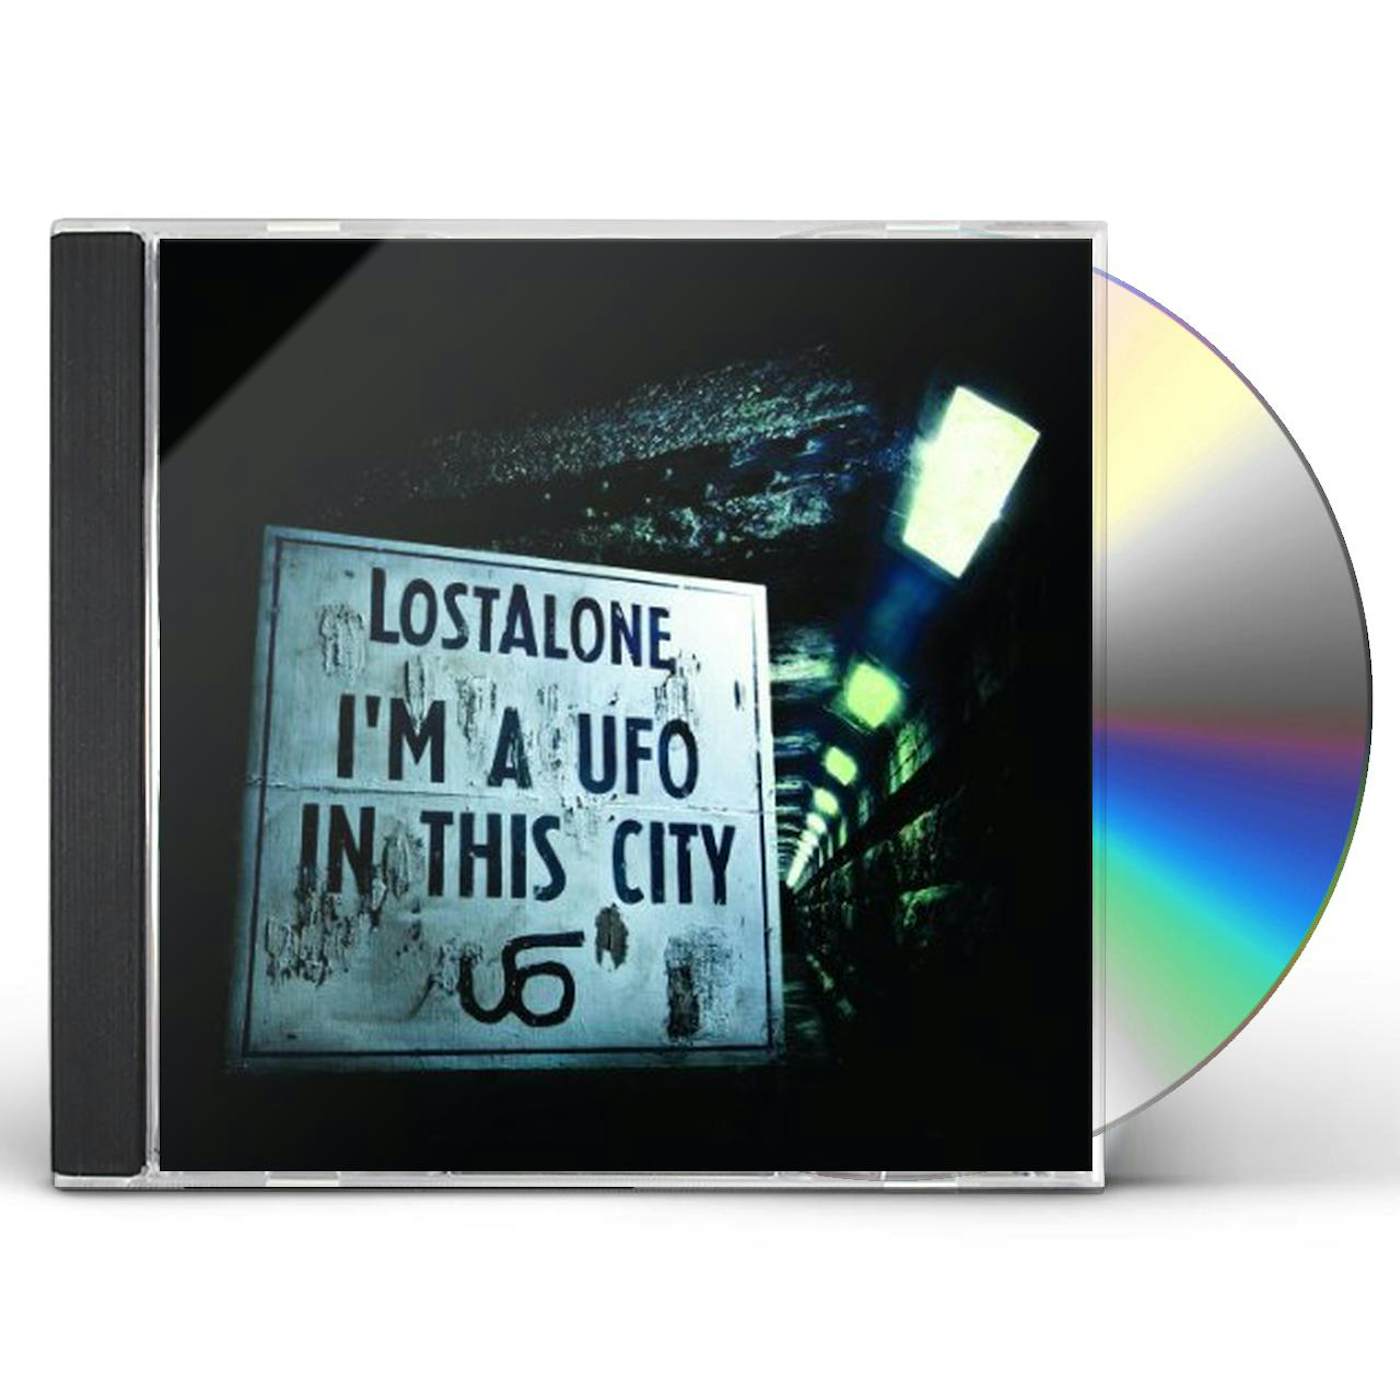 LostAlone I'M A UFO IN THIS CITY CD